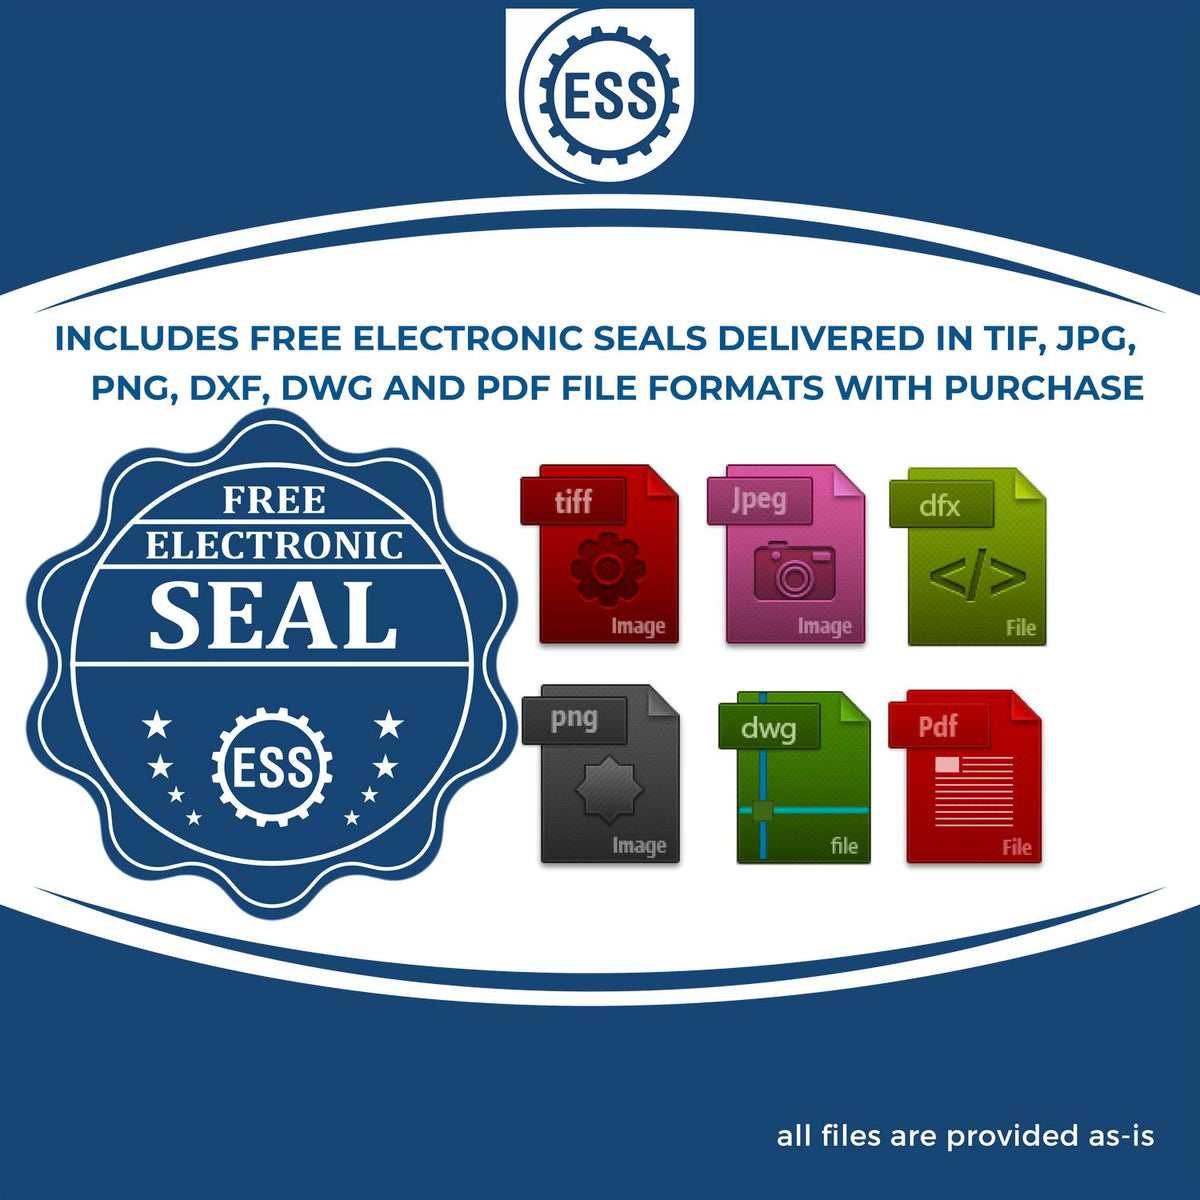 An infographic for the free electronic seal for the Soft New Mexico Professional Geologist Seal illustrating the different file type icons such as DXF, DWG, TIF, JPG and PNG.